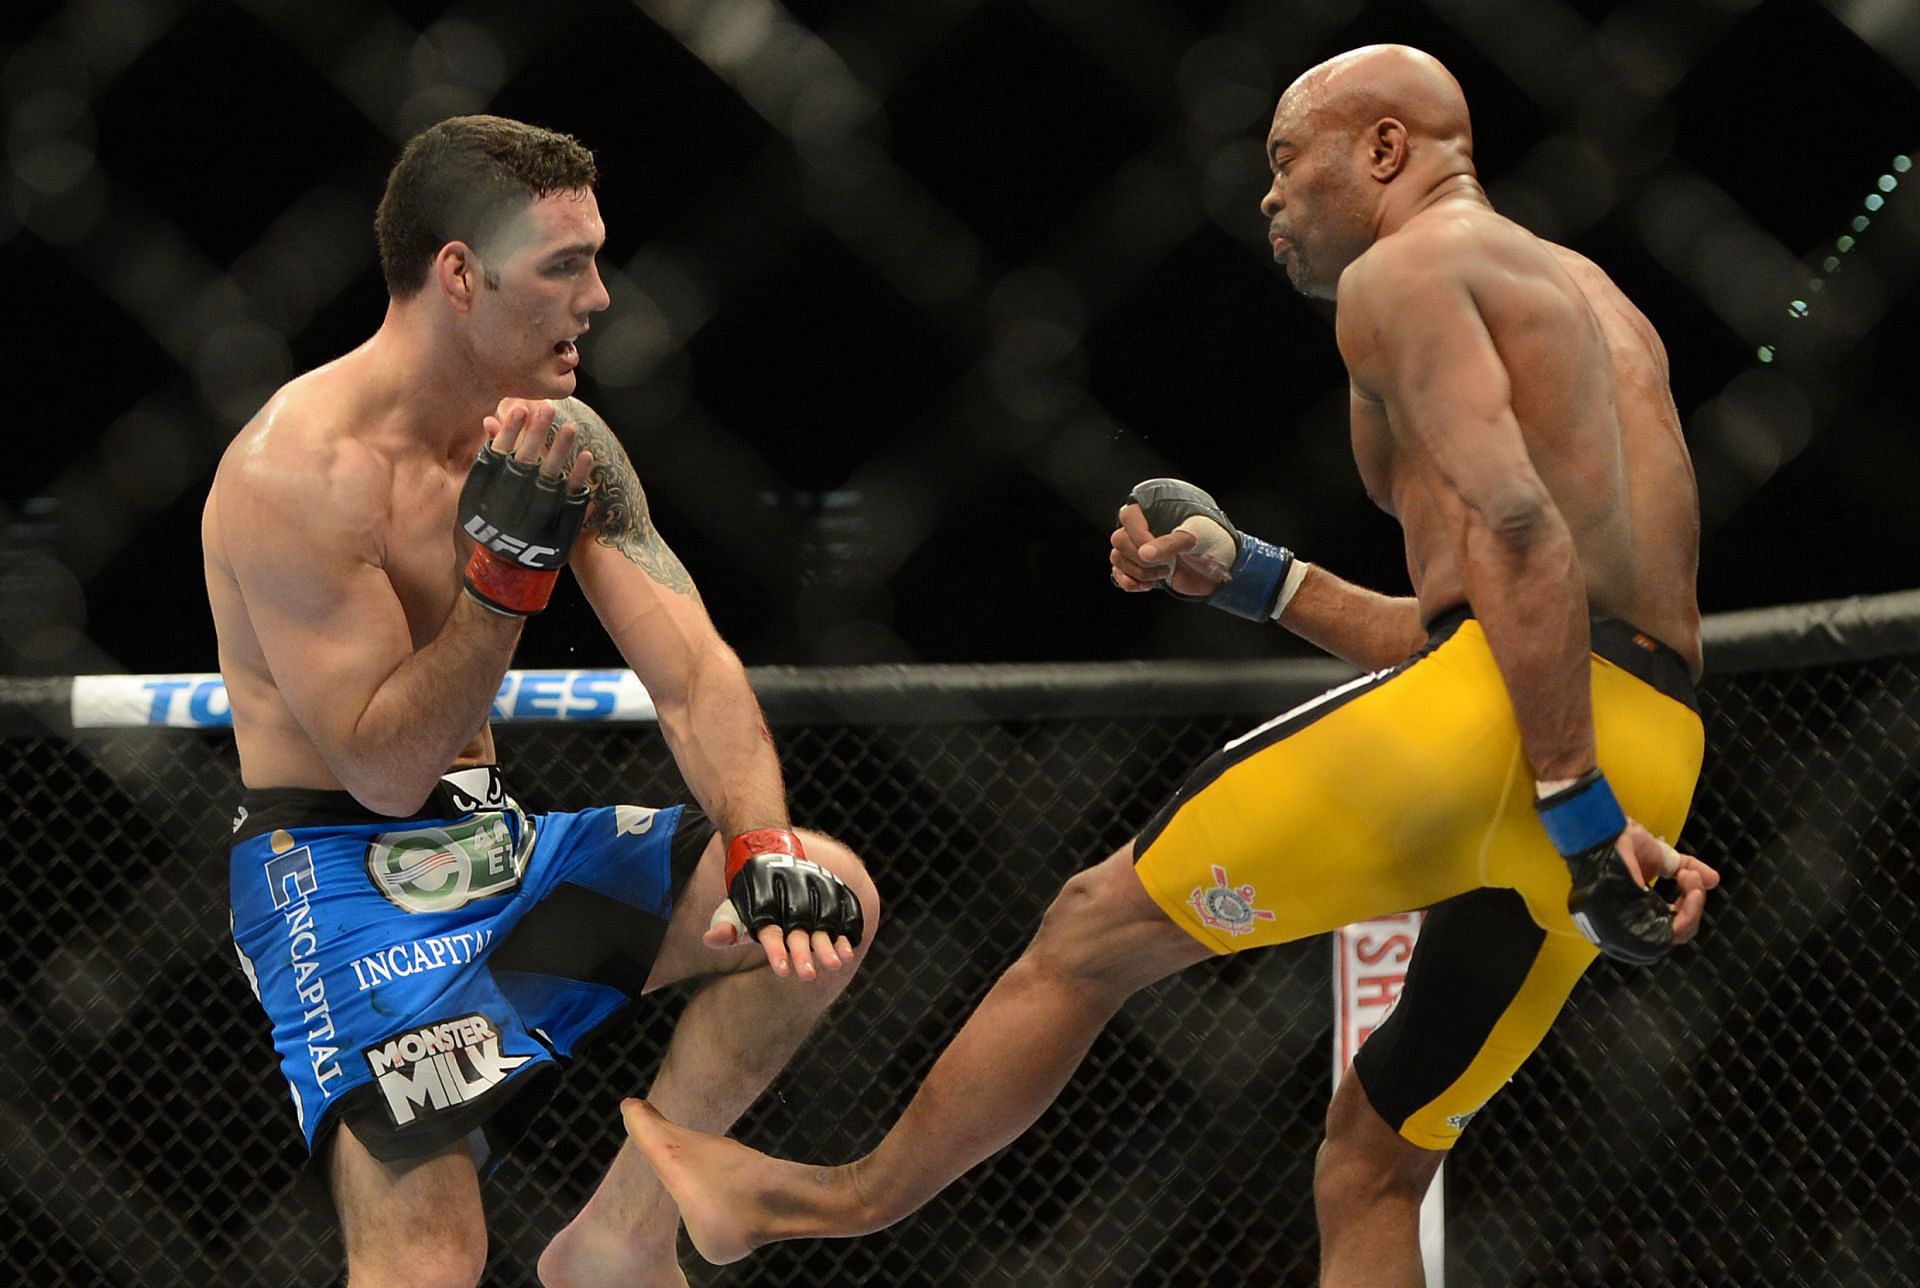 The dramatic finish between Chris Weidman and Anderson Silva ended UFC 168 with a bang